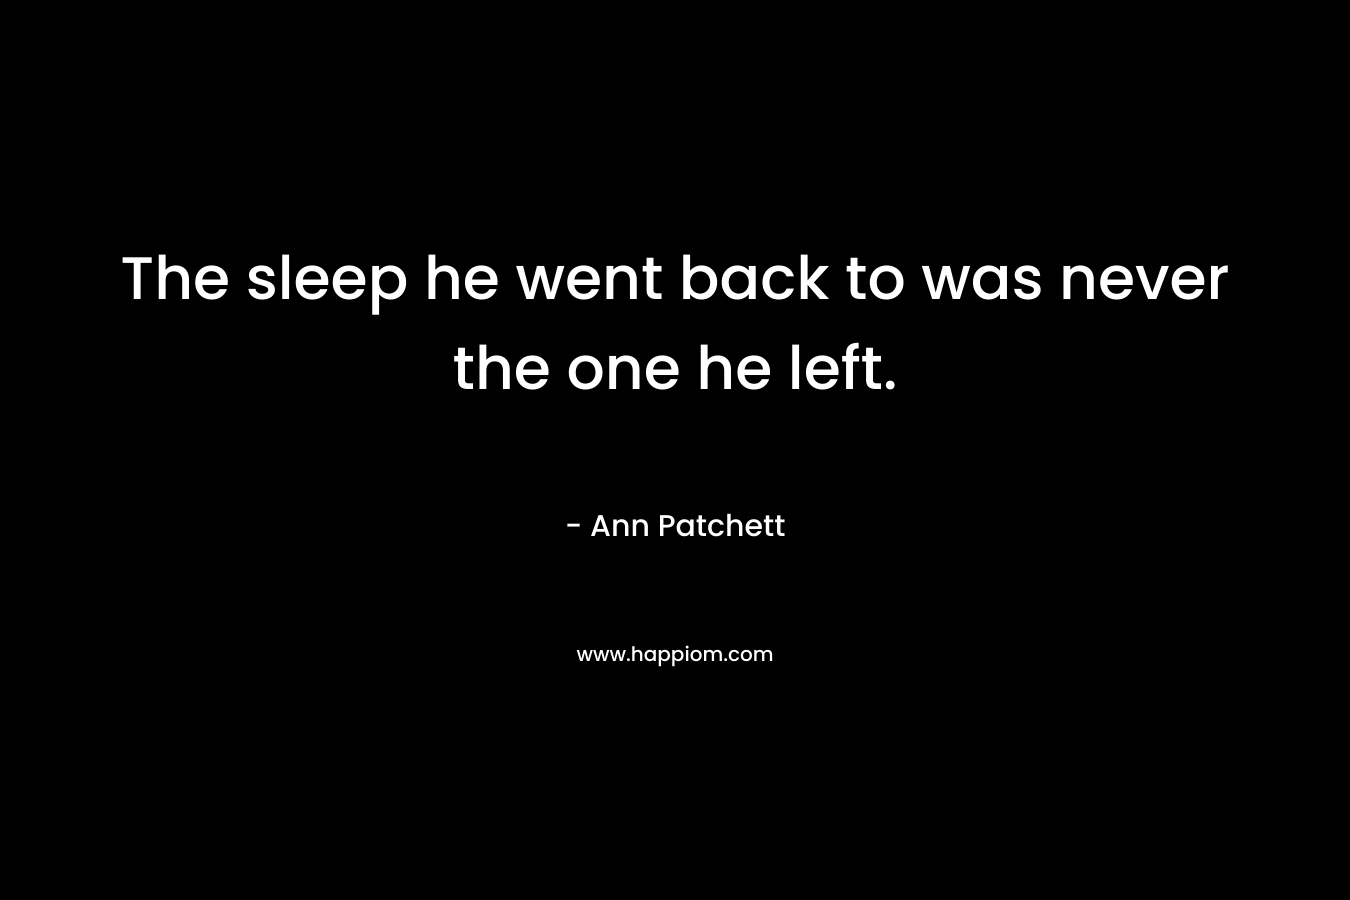 The sleep he went back to was never the one he left.